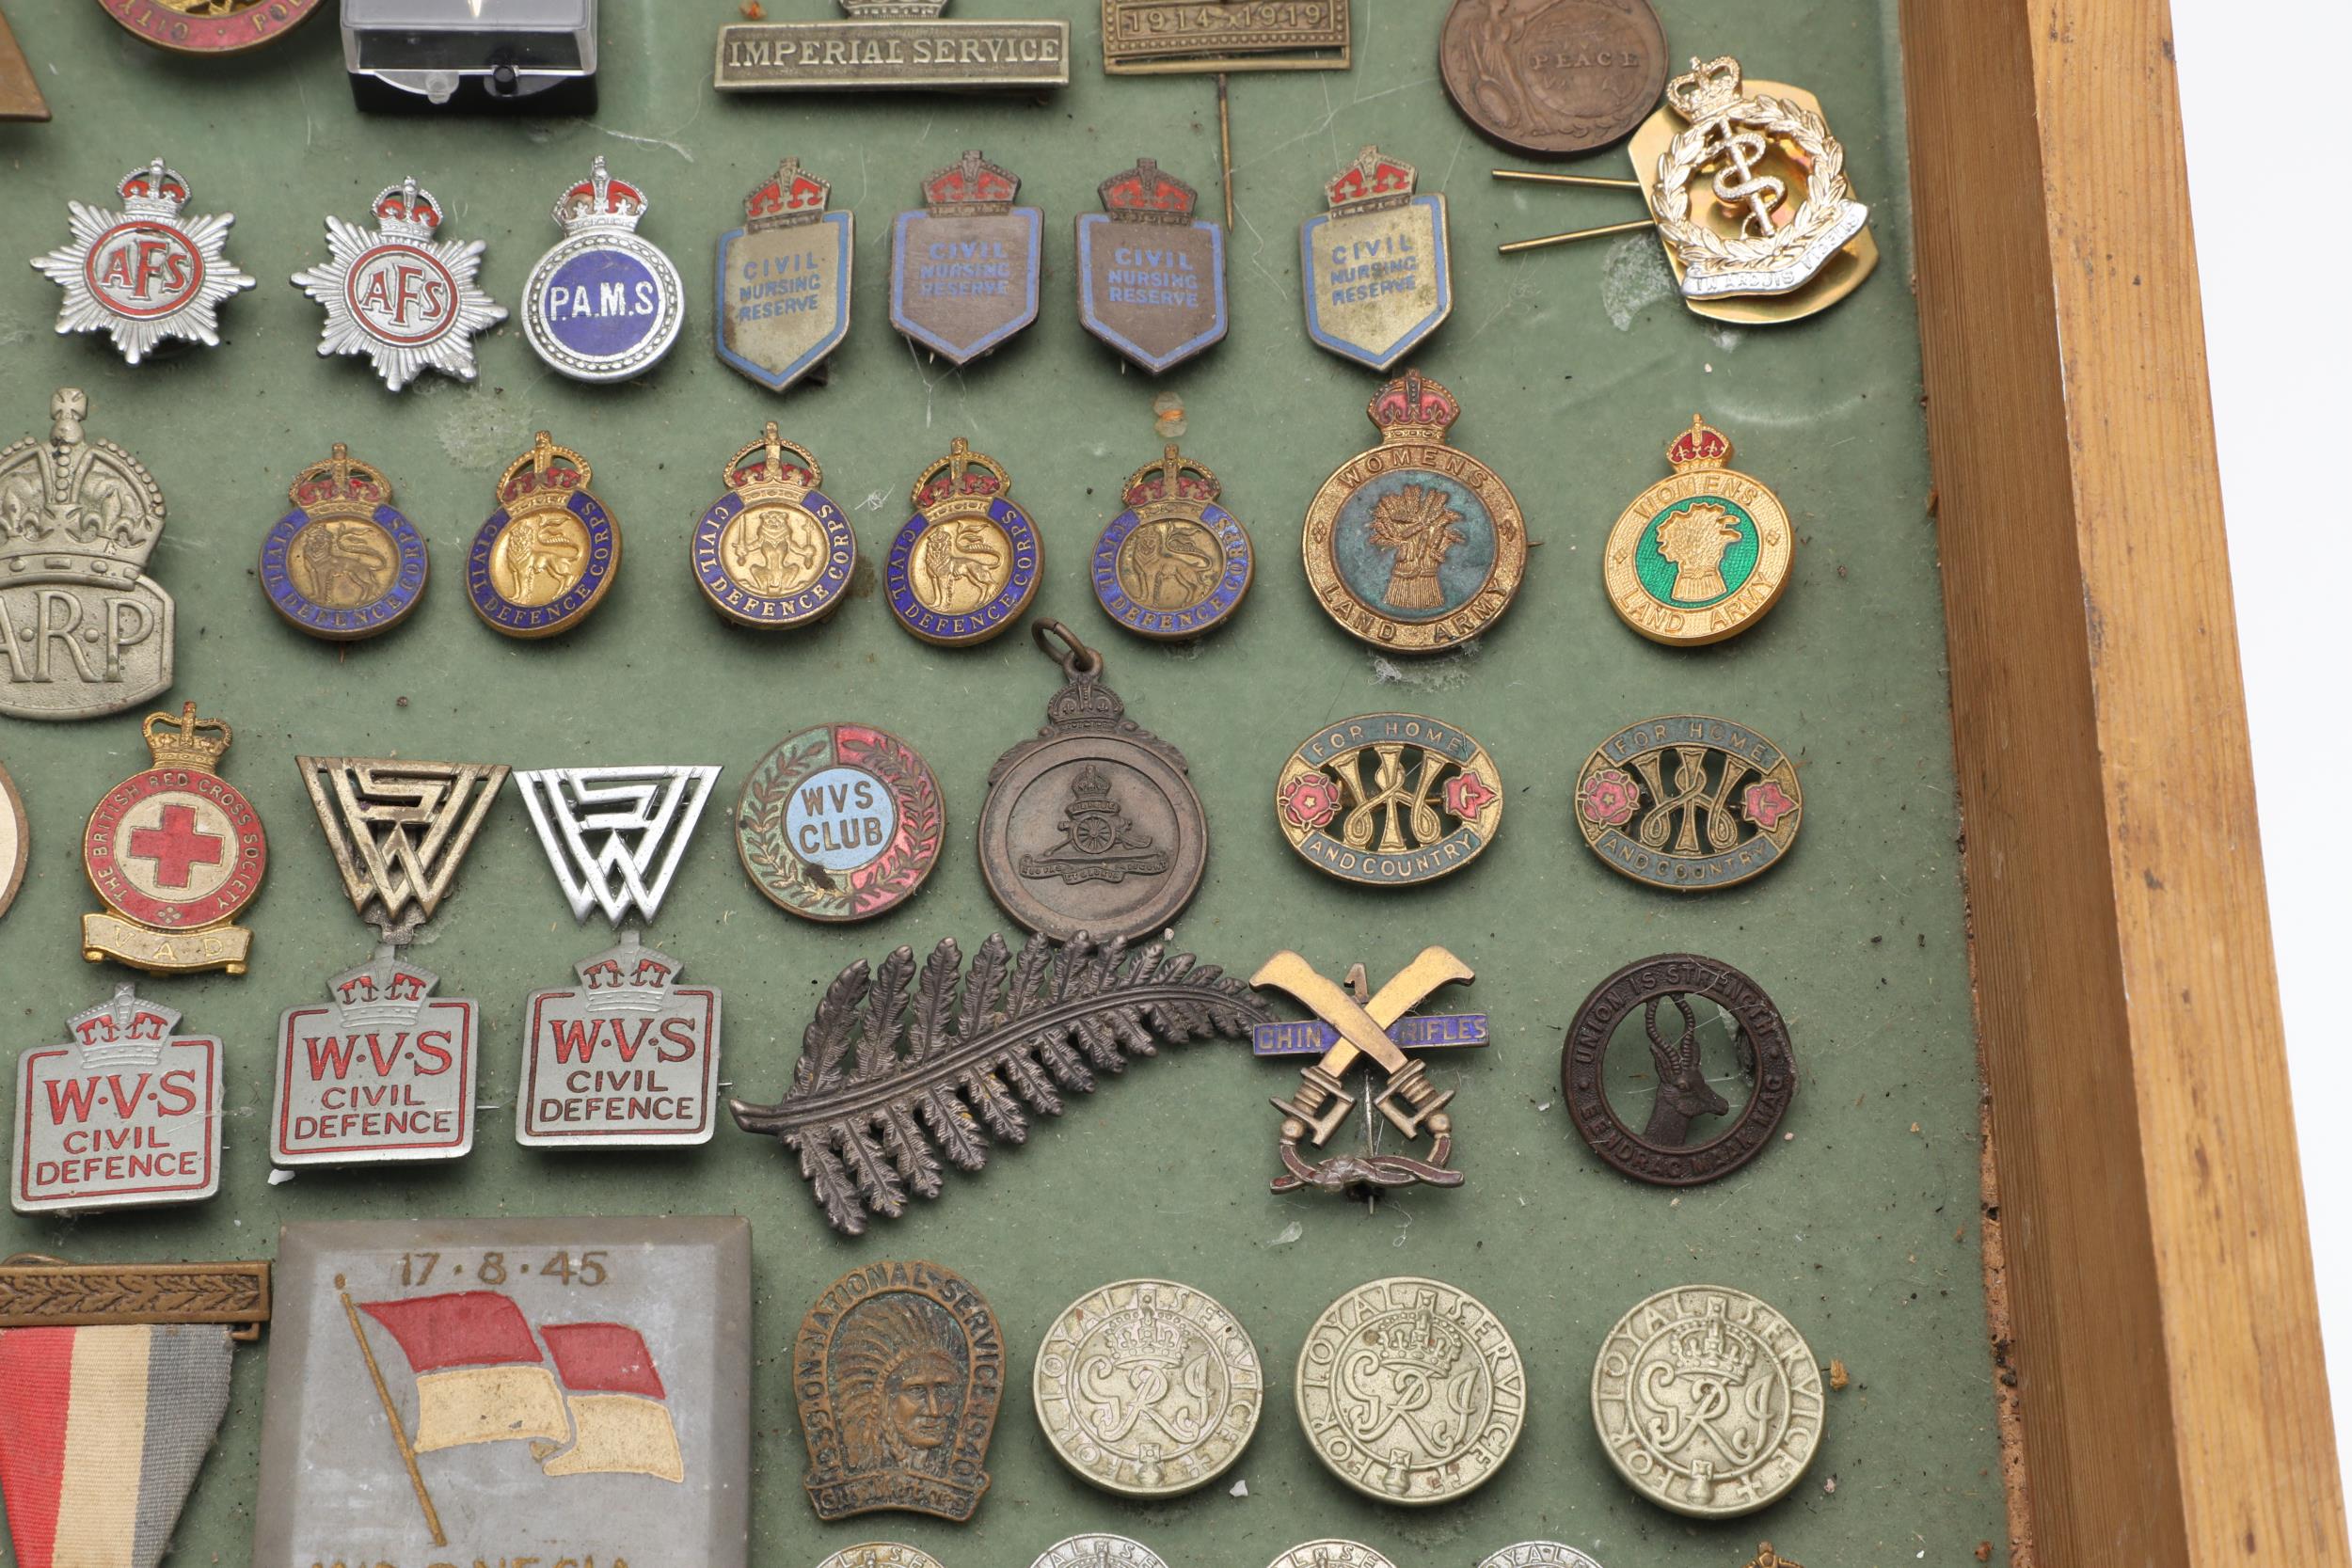 AN INTERESTING COLLECTION OF MILITARY RELATED ENAMEL AND SIMILAR BADGES. - Image 5 of 7